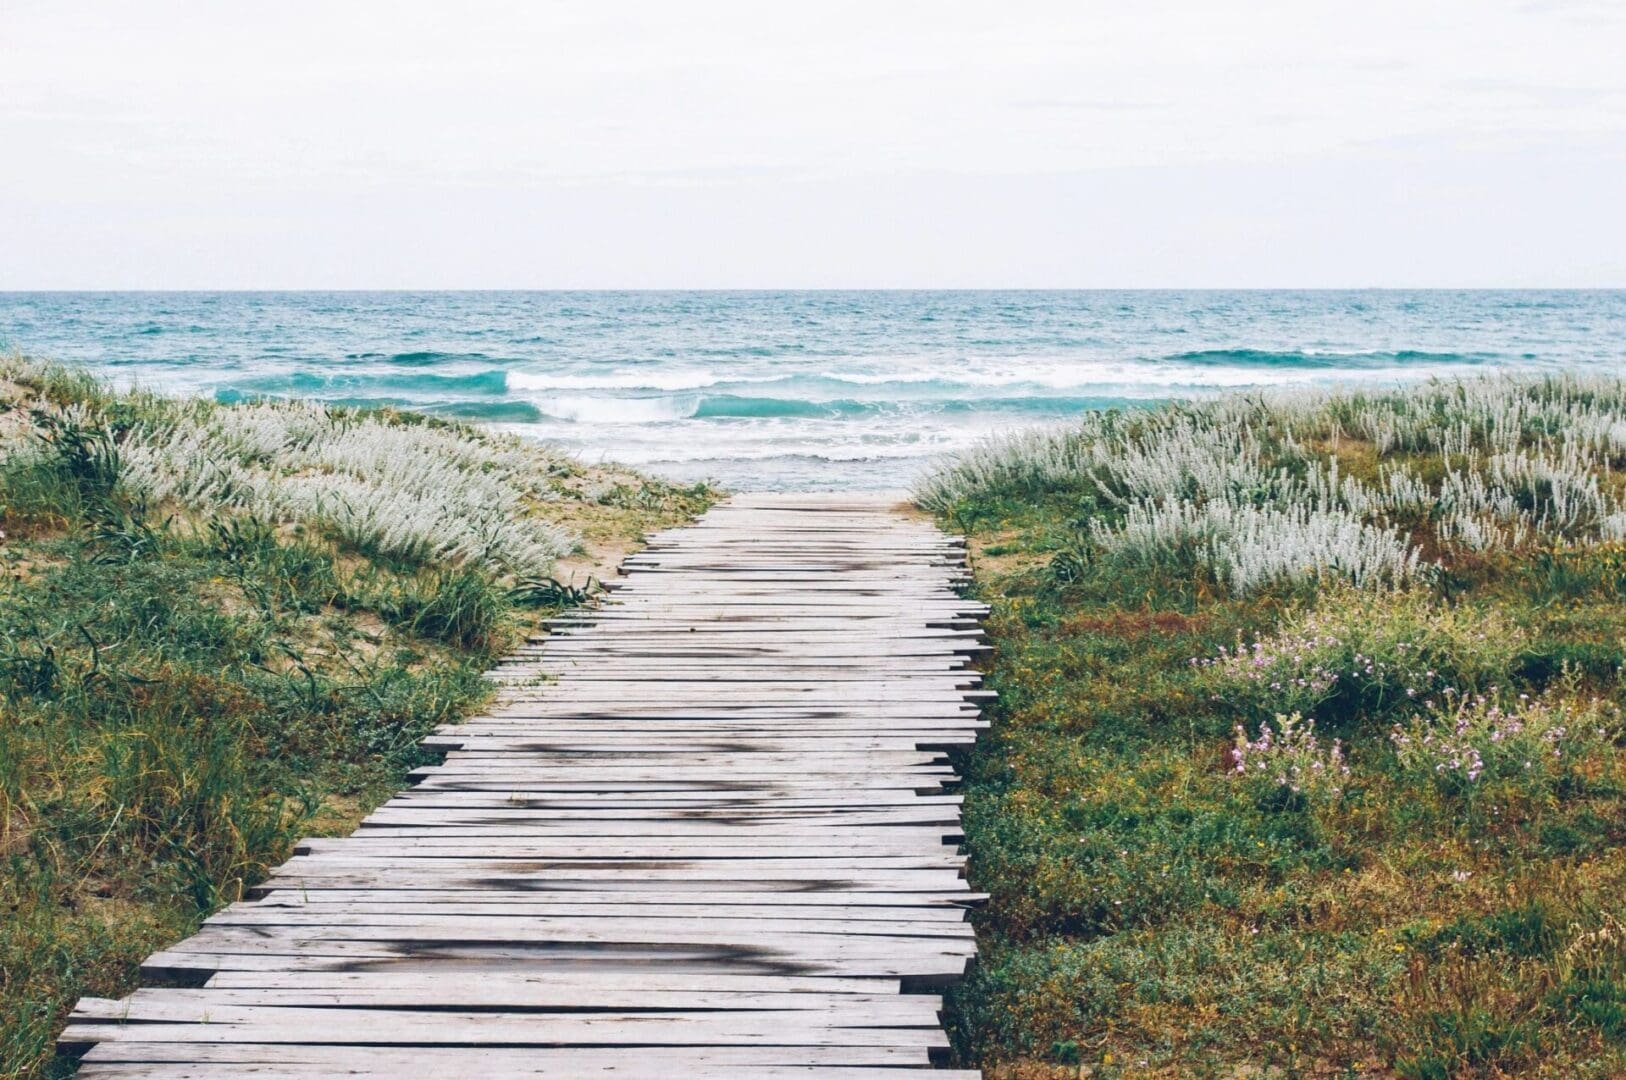 A wooden walkway leading to the ocean.